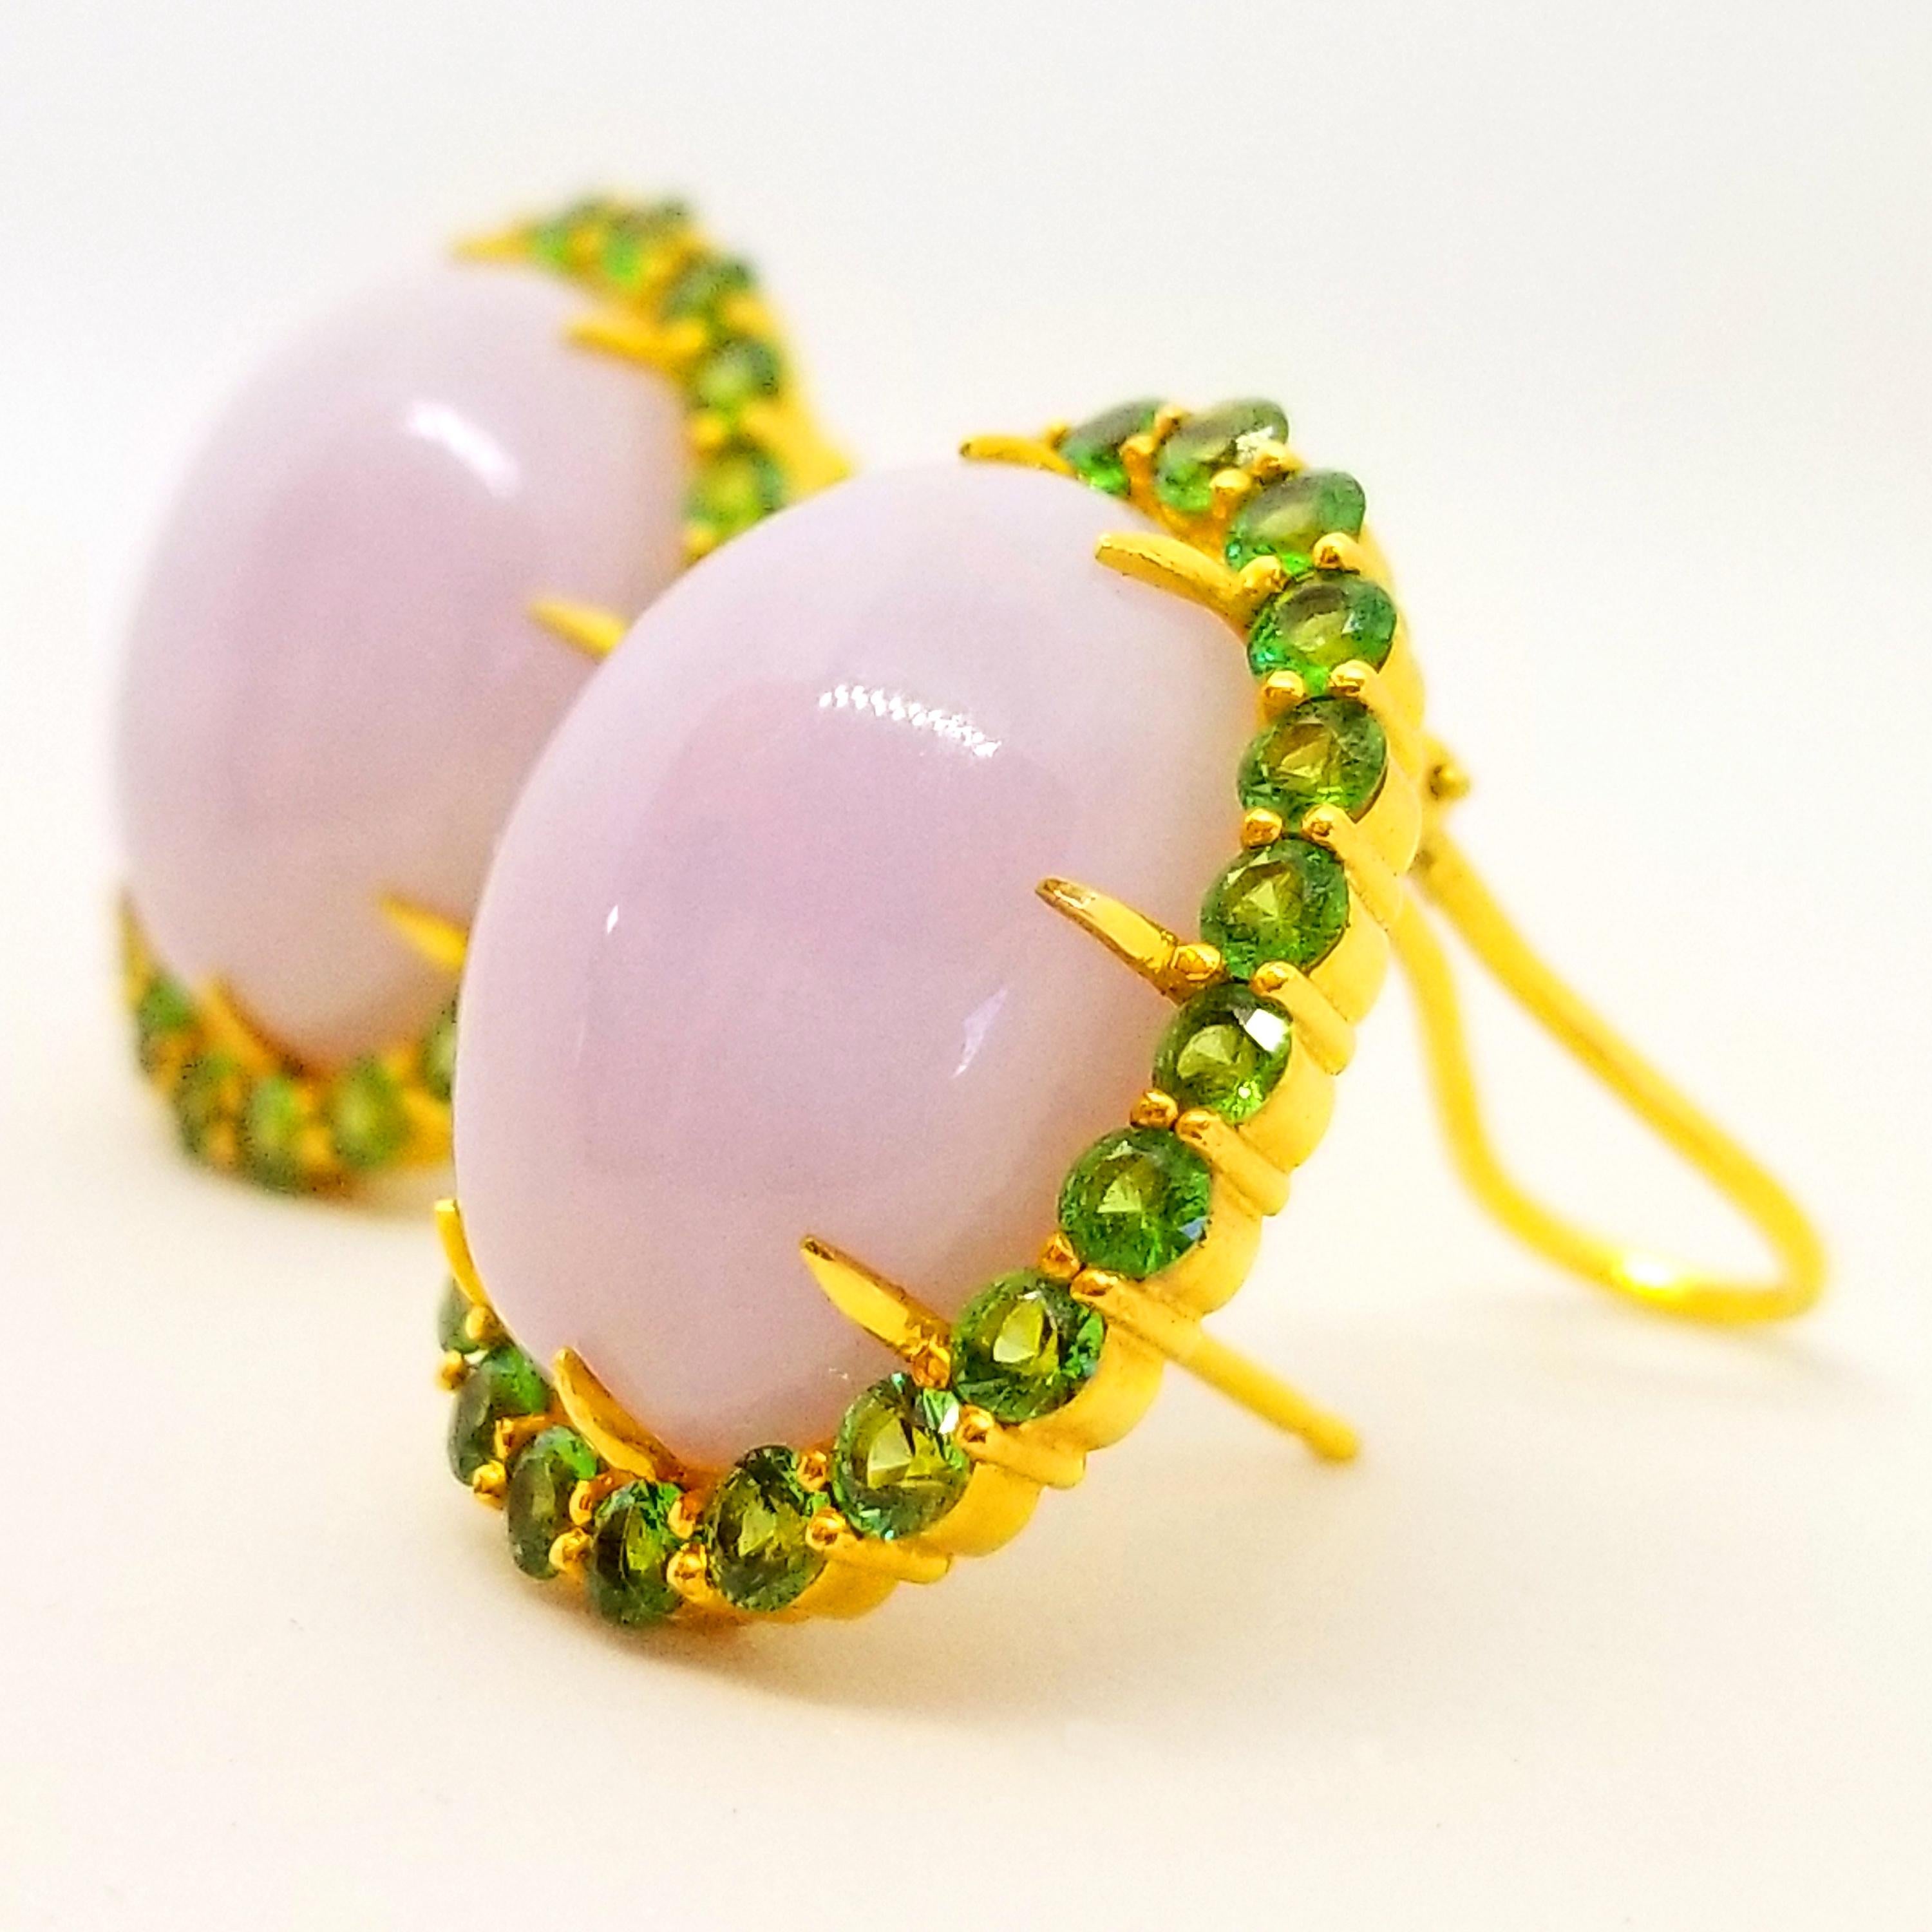 This Colorful pair of Cluster Earrings in Purple and Green are One of a Kind in 18K Yellow Gold. The Earrings feature Round Brilliant cut, natural  Grass Green Tsavorite Garnets of 4.0 Carats total weight. The Gem Quality, Round Brilliant Cut stones